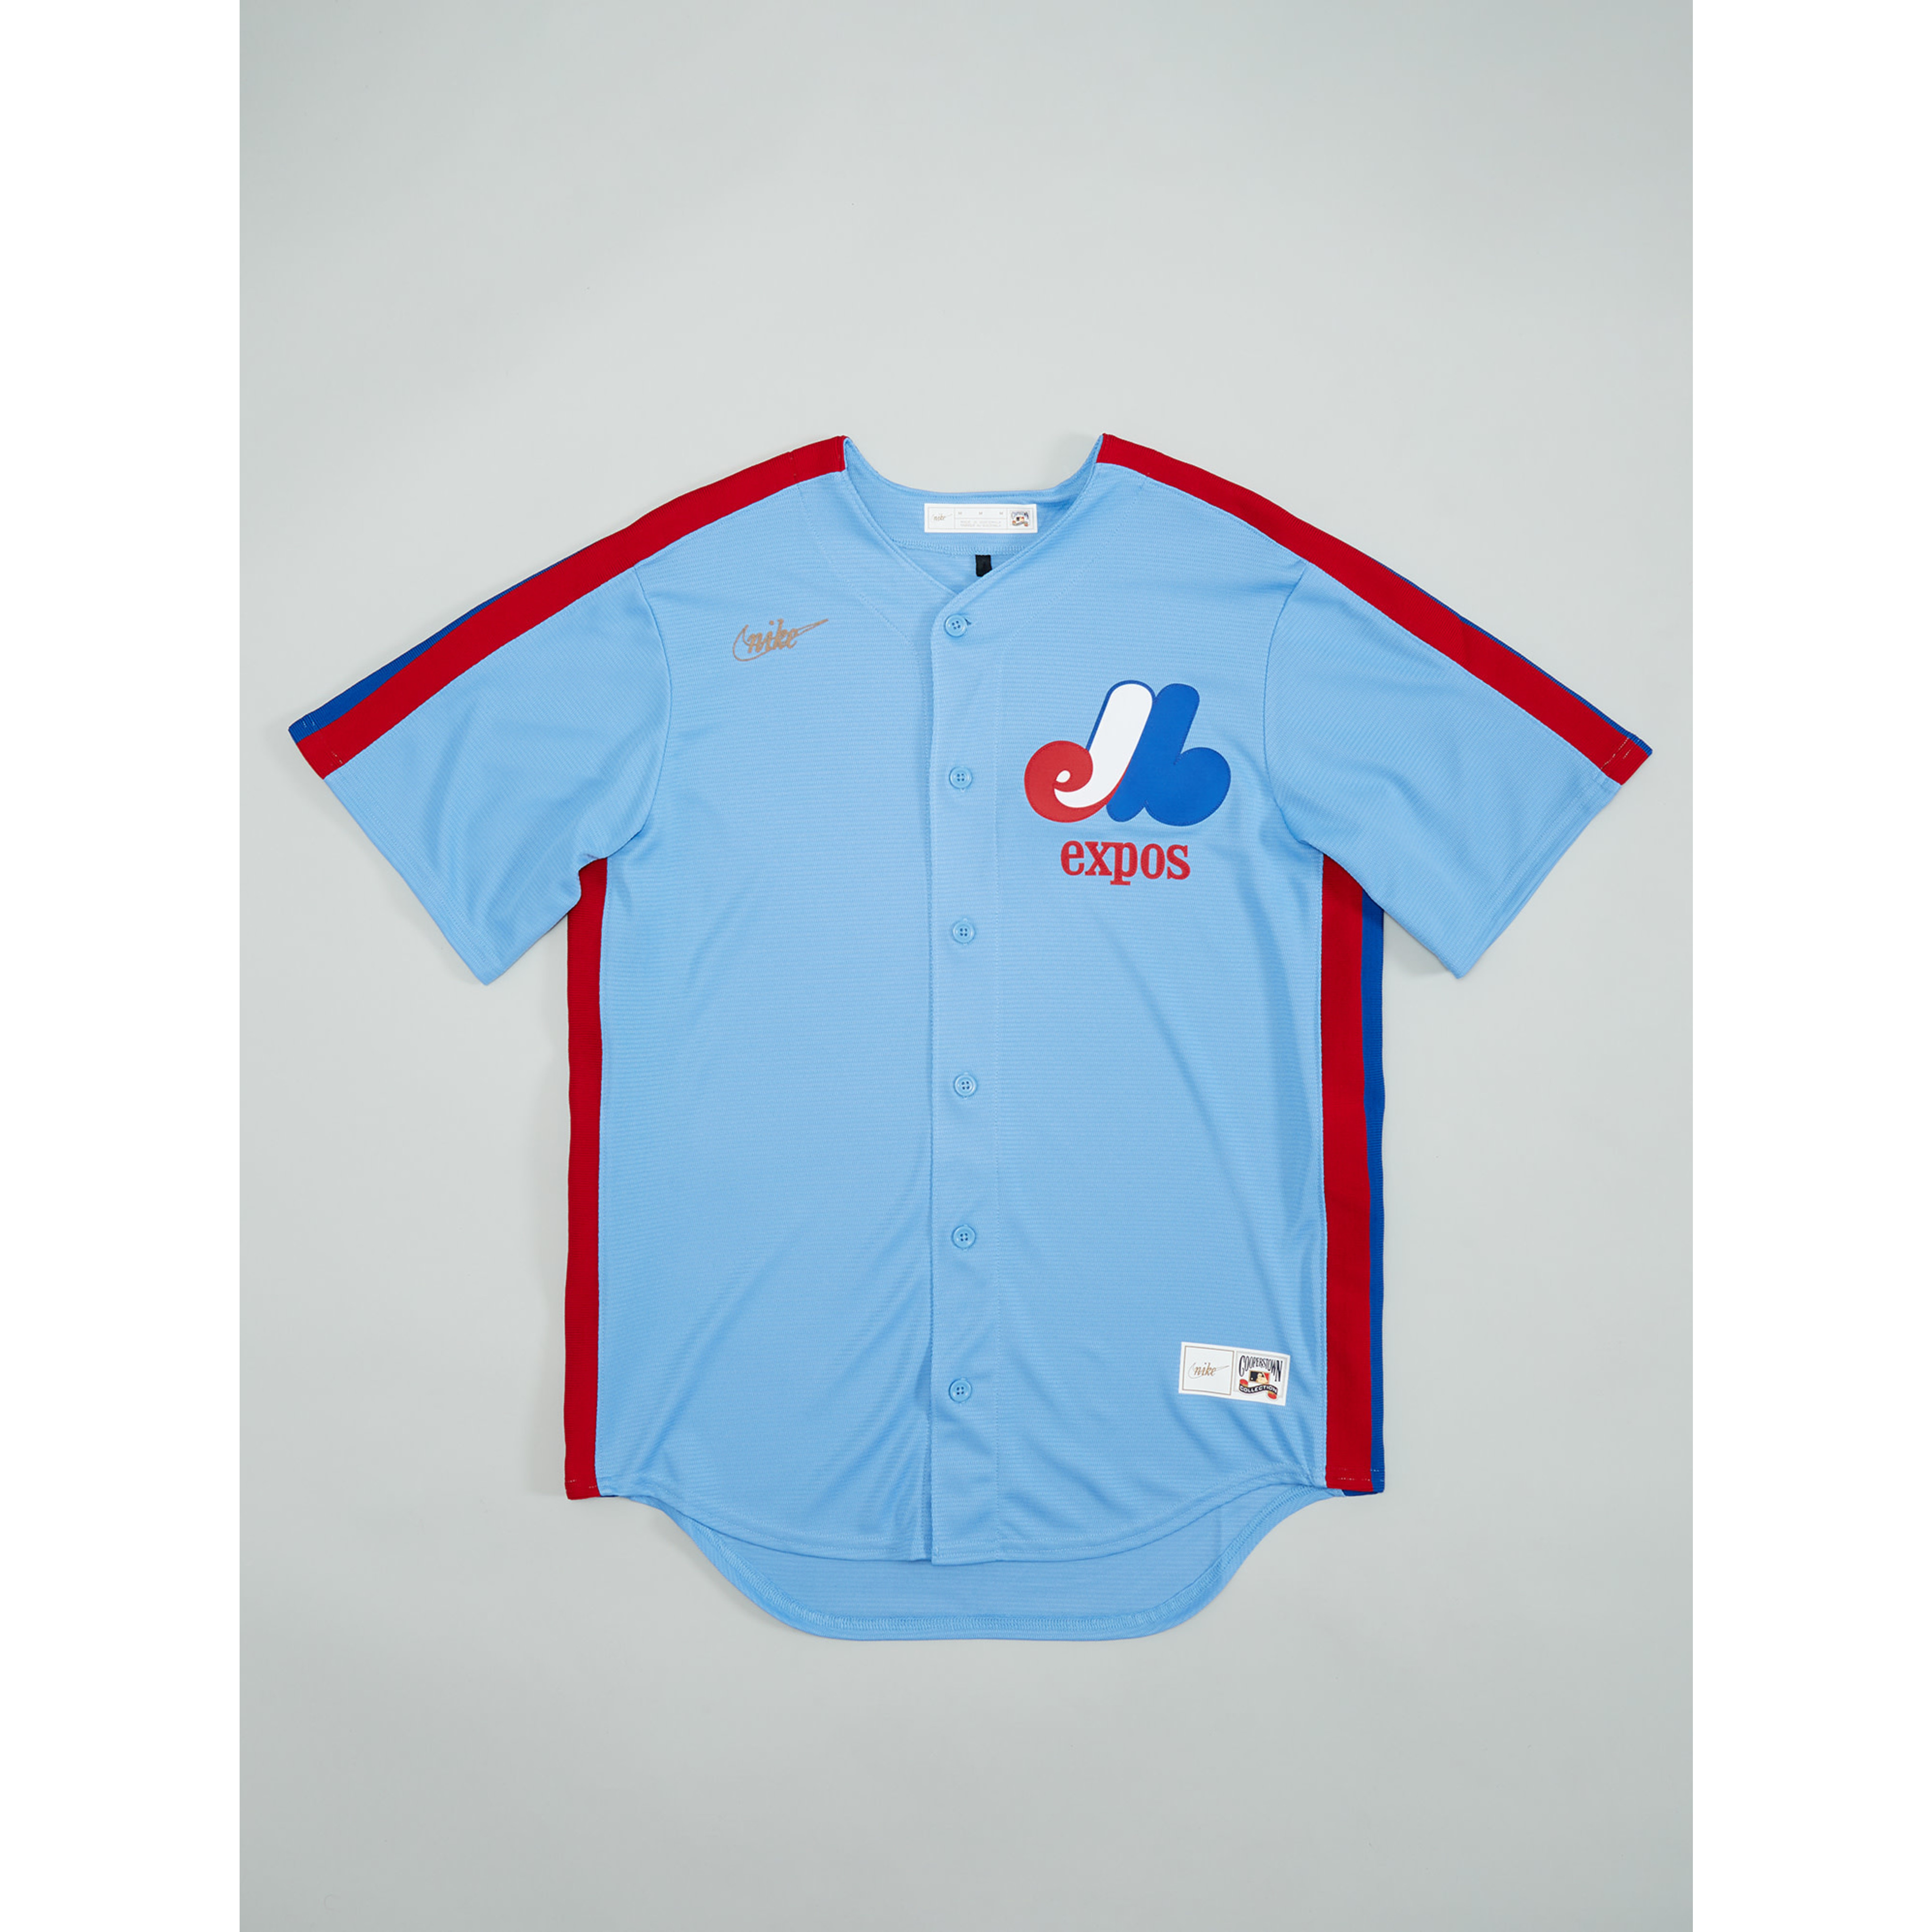 old expos uniforms